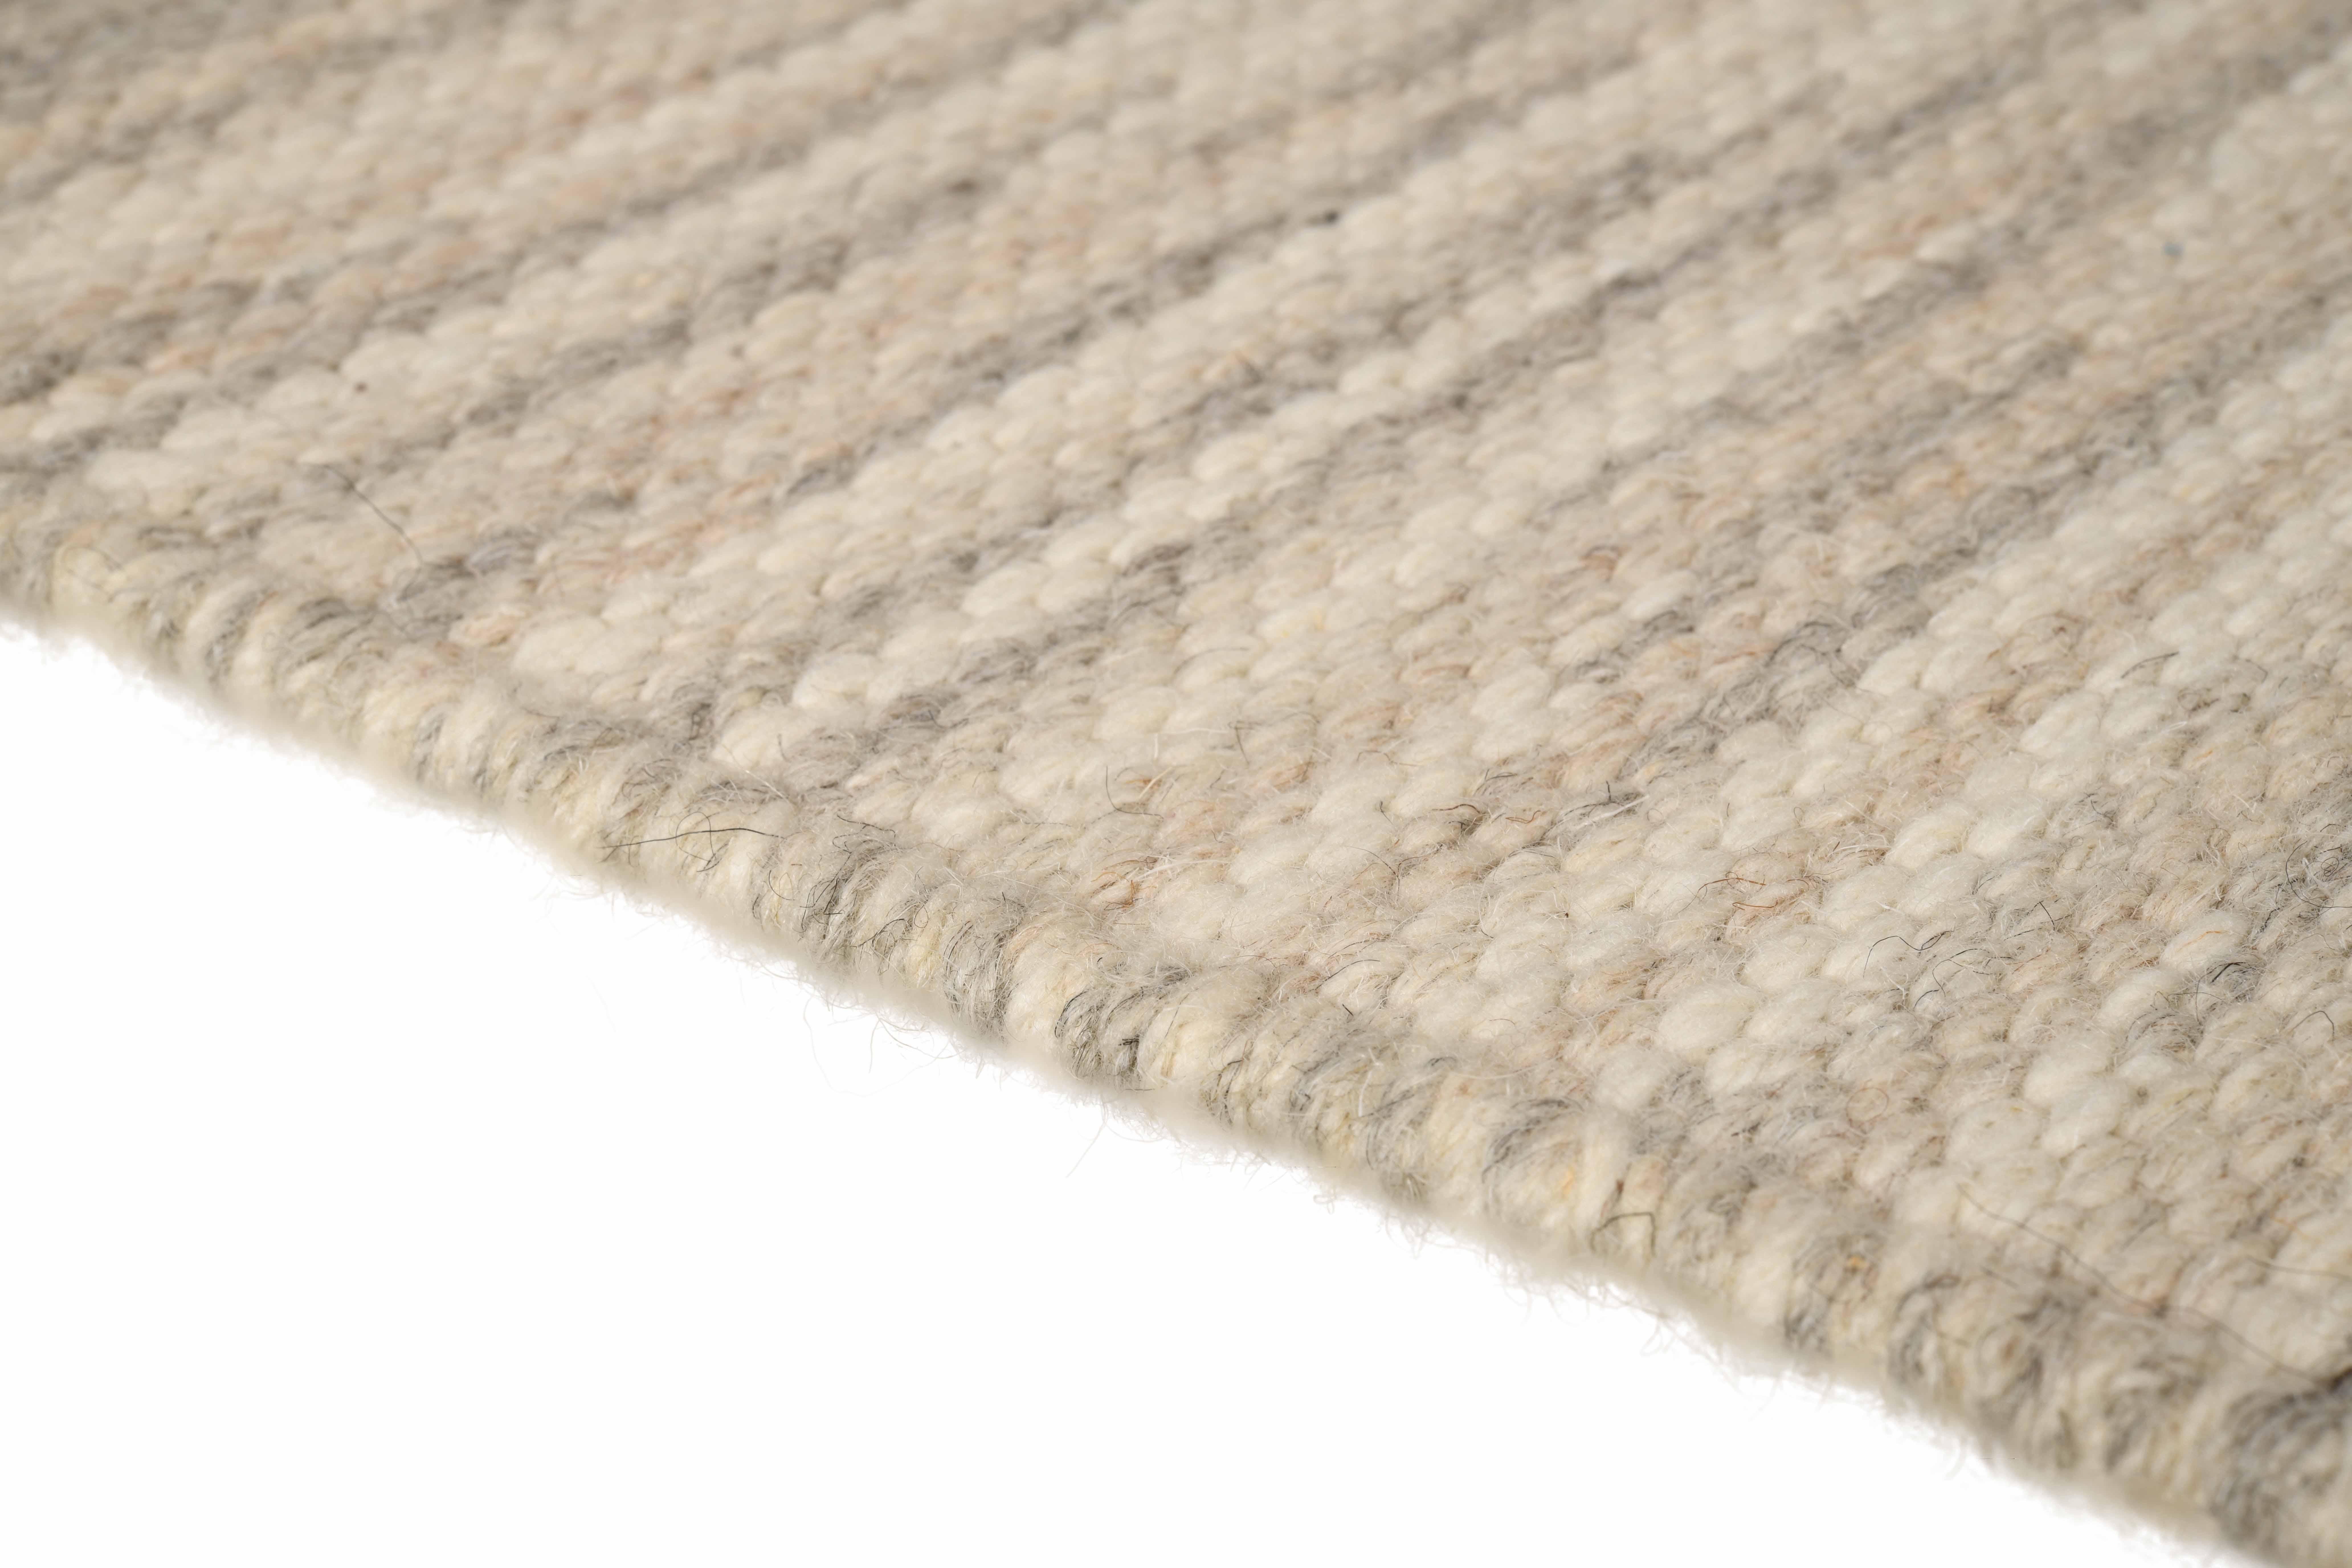 Rivus takes us on a journey like a graceful stream flowing aimlessly through the valleys. Undulating natural wool yarns meander thoughtfully through the high and low neutral tones, coalescing towards a subtle yet striking linear design.
